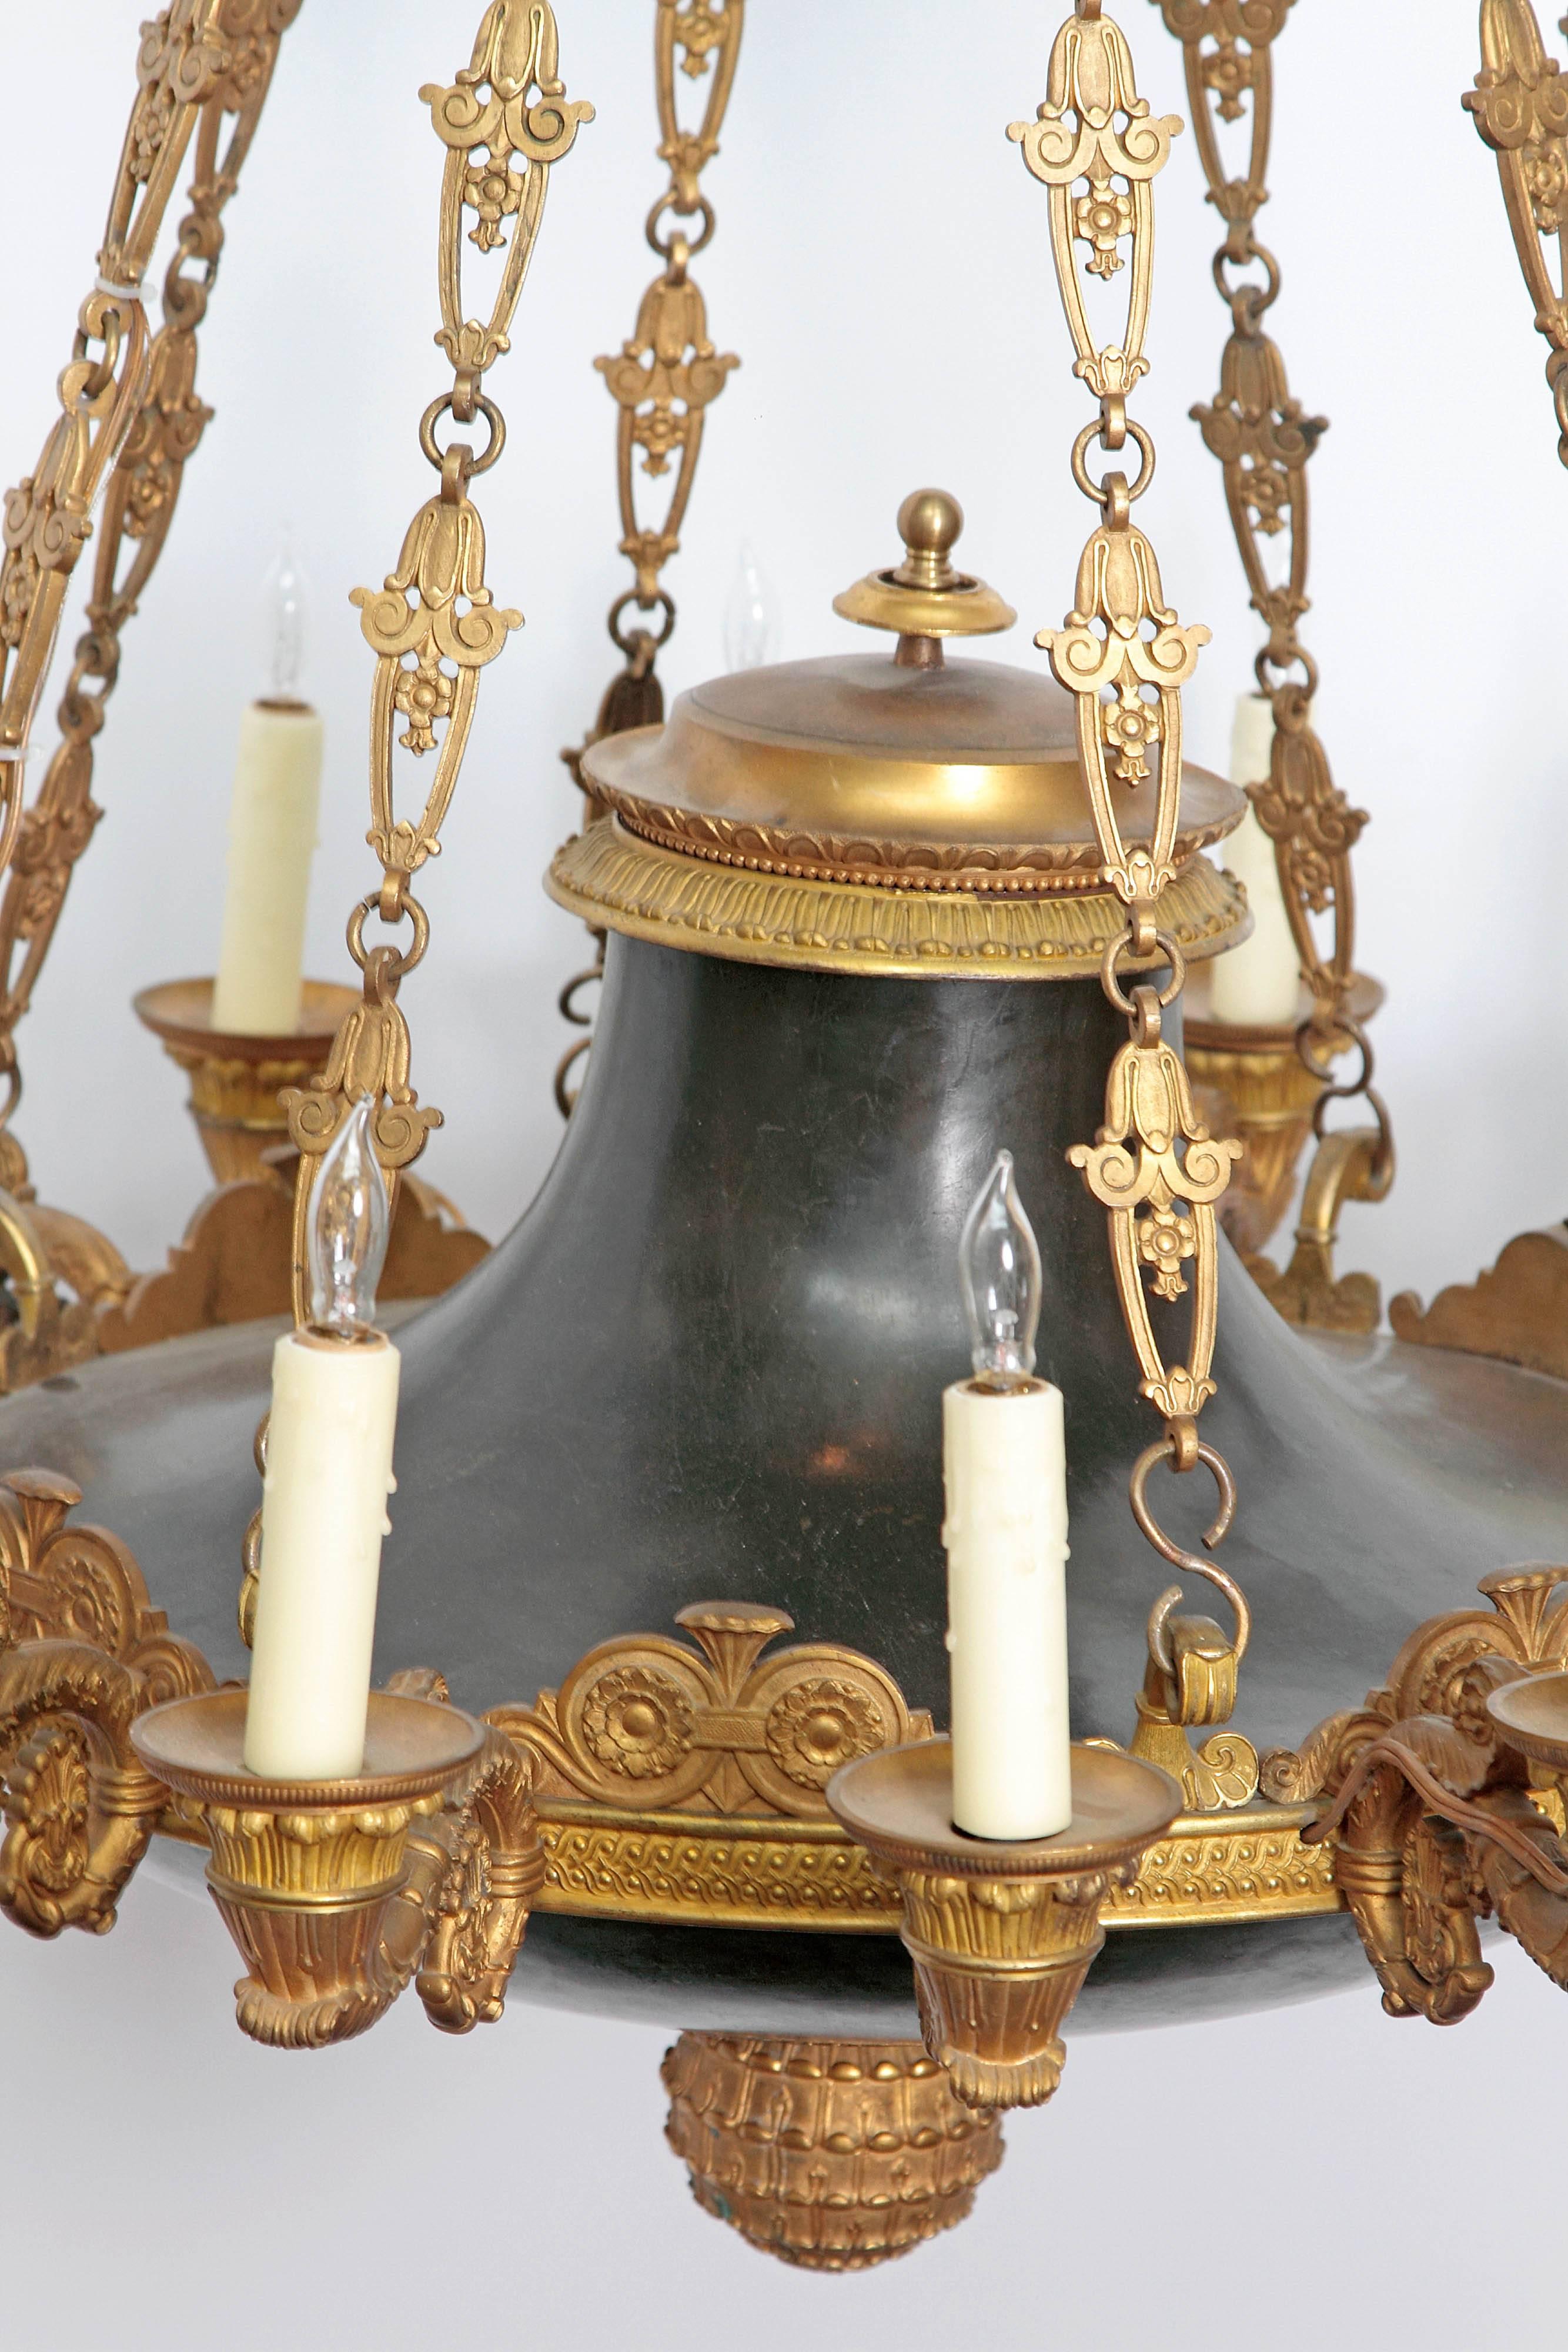 19th Century French Empire Patinated and Gilt Bronze Argon Chandelier / 16 Lights